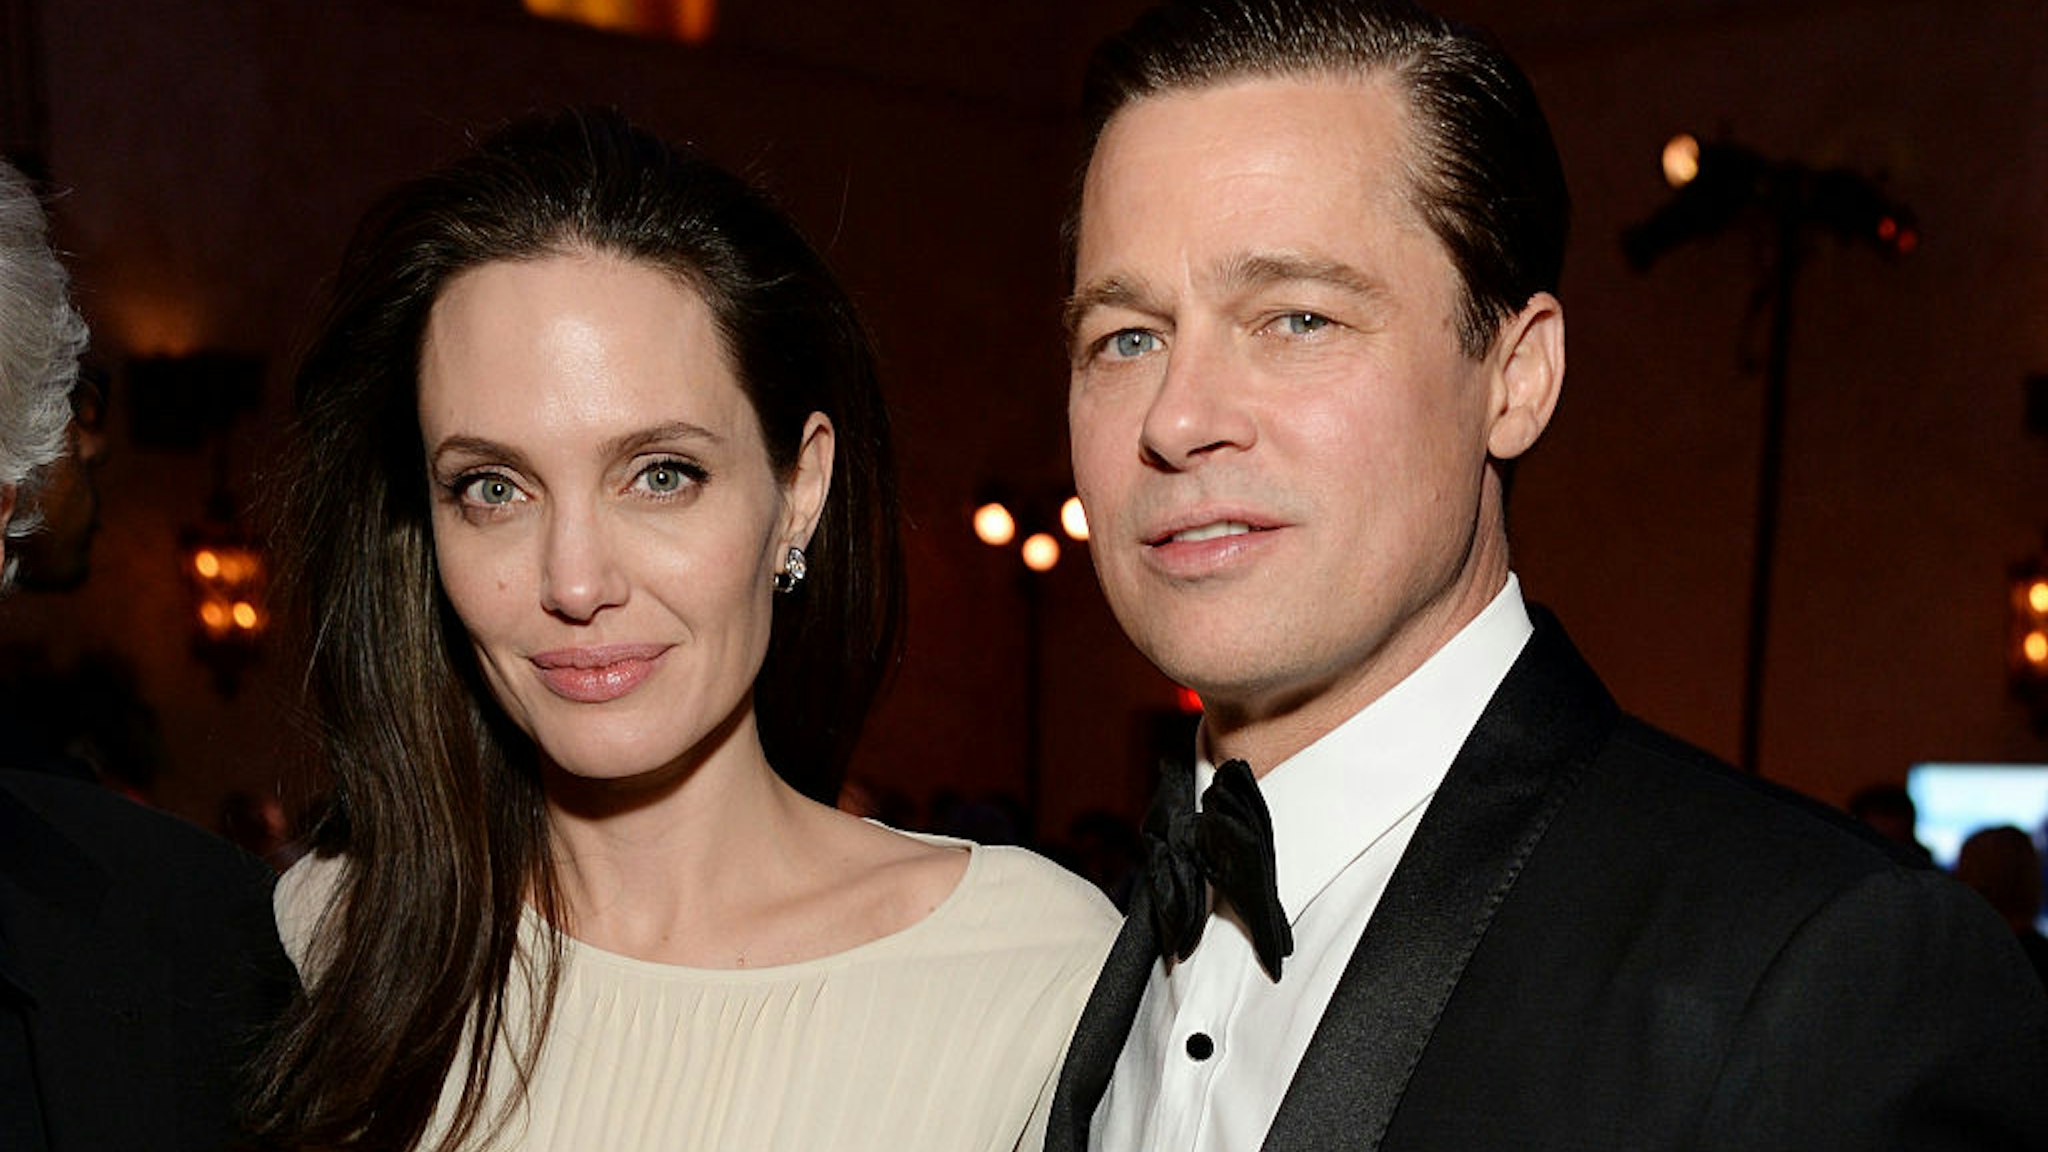 HOLLYWOOD, CA - NOVEMBER 05: Writer-director-producer-actress Angelina Jolie Pitt (L) and actor-producer Brad Pitt attend the after party for the opening night gala premiere of Universal Pictures' "By the Sea" during AFI FEST 2015 presented by Audi at TCL Chinese 6 Theatres on November 5, 2015 in Hollywood, California. (Photo by Michael Kovac/Getty Images for AFI)